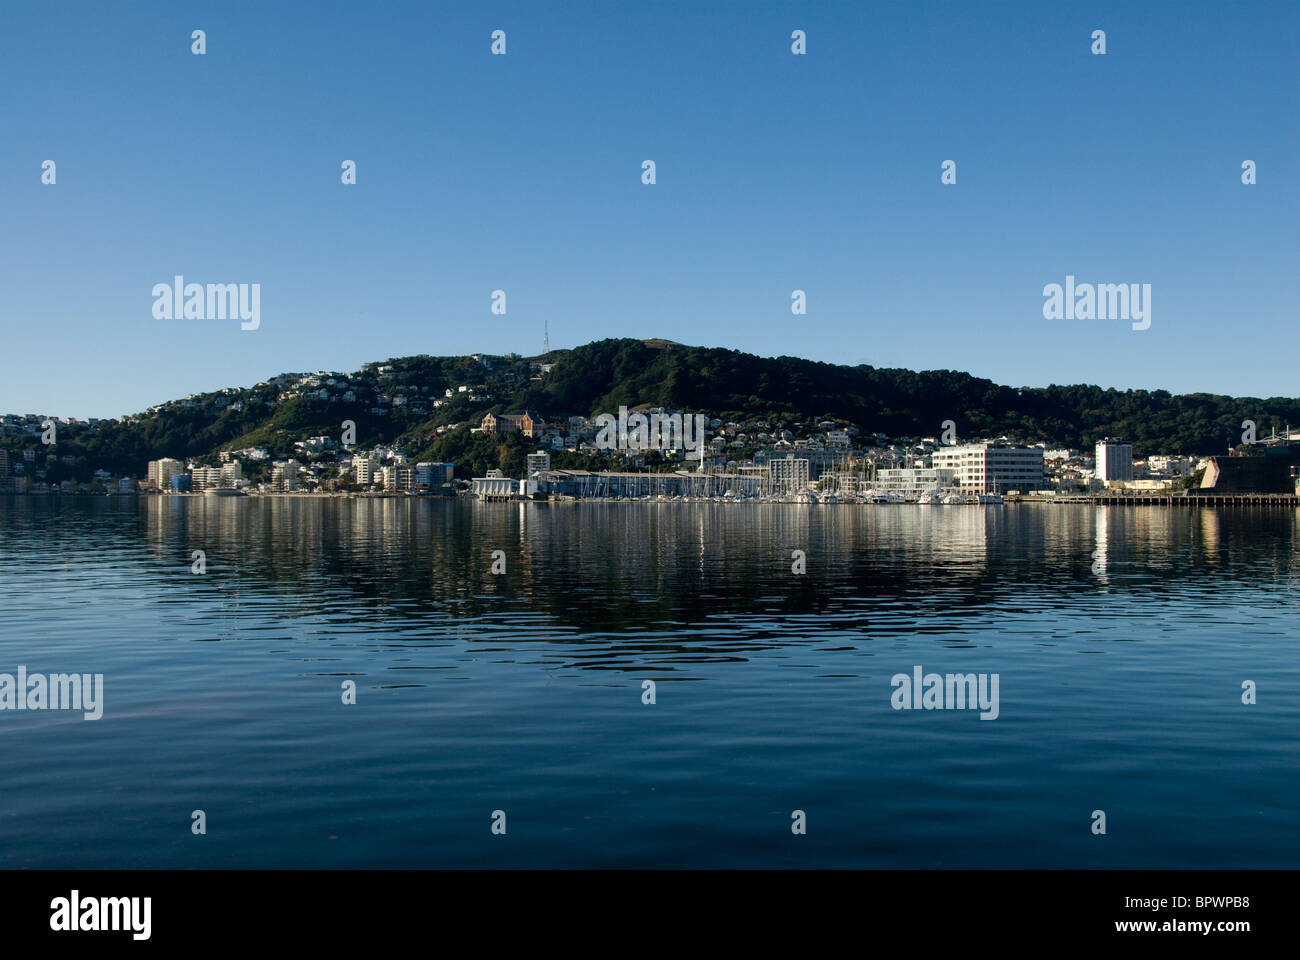 Houses on hillside, reflections in harbour, Mount Victoria, Wellington, North Island, New Zealand Stock Photo